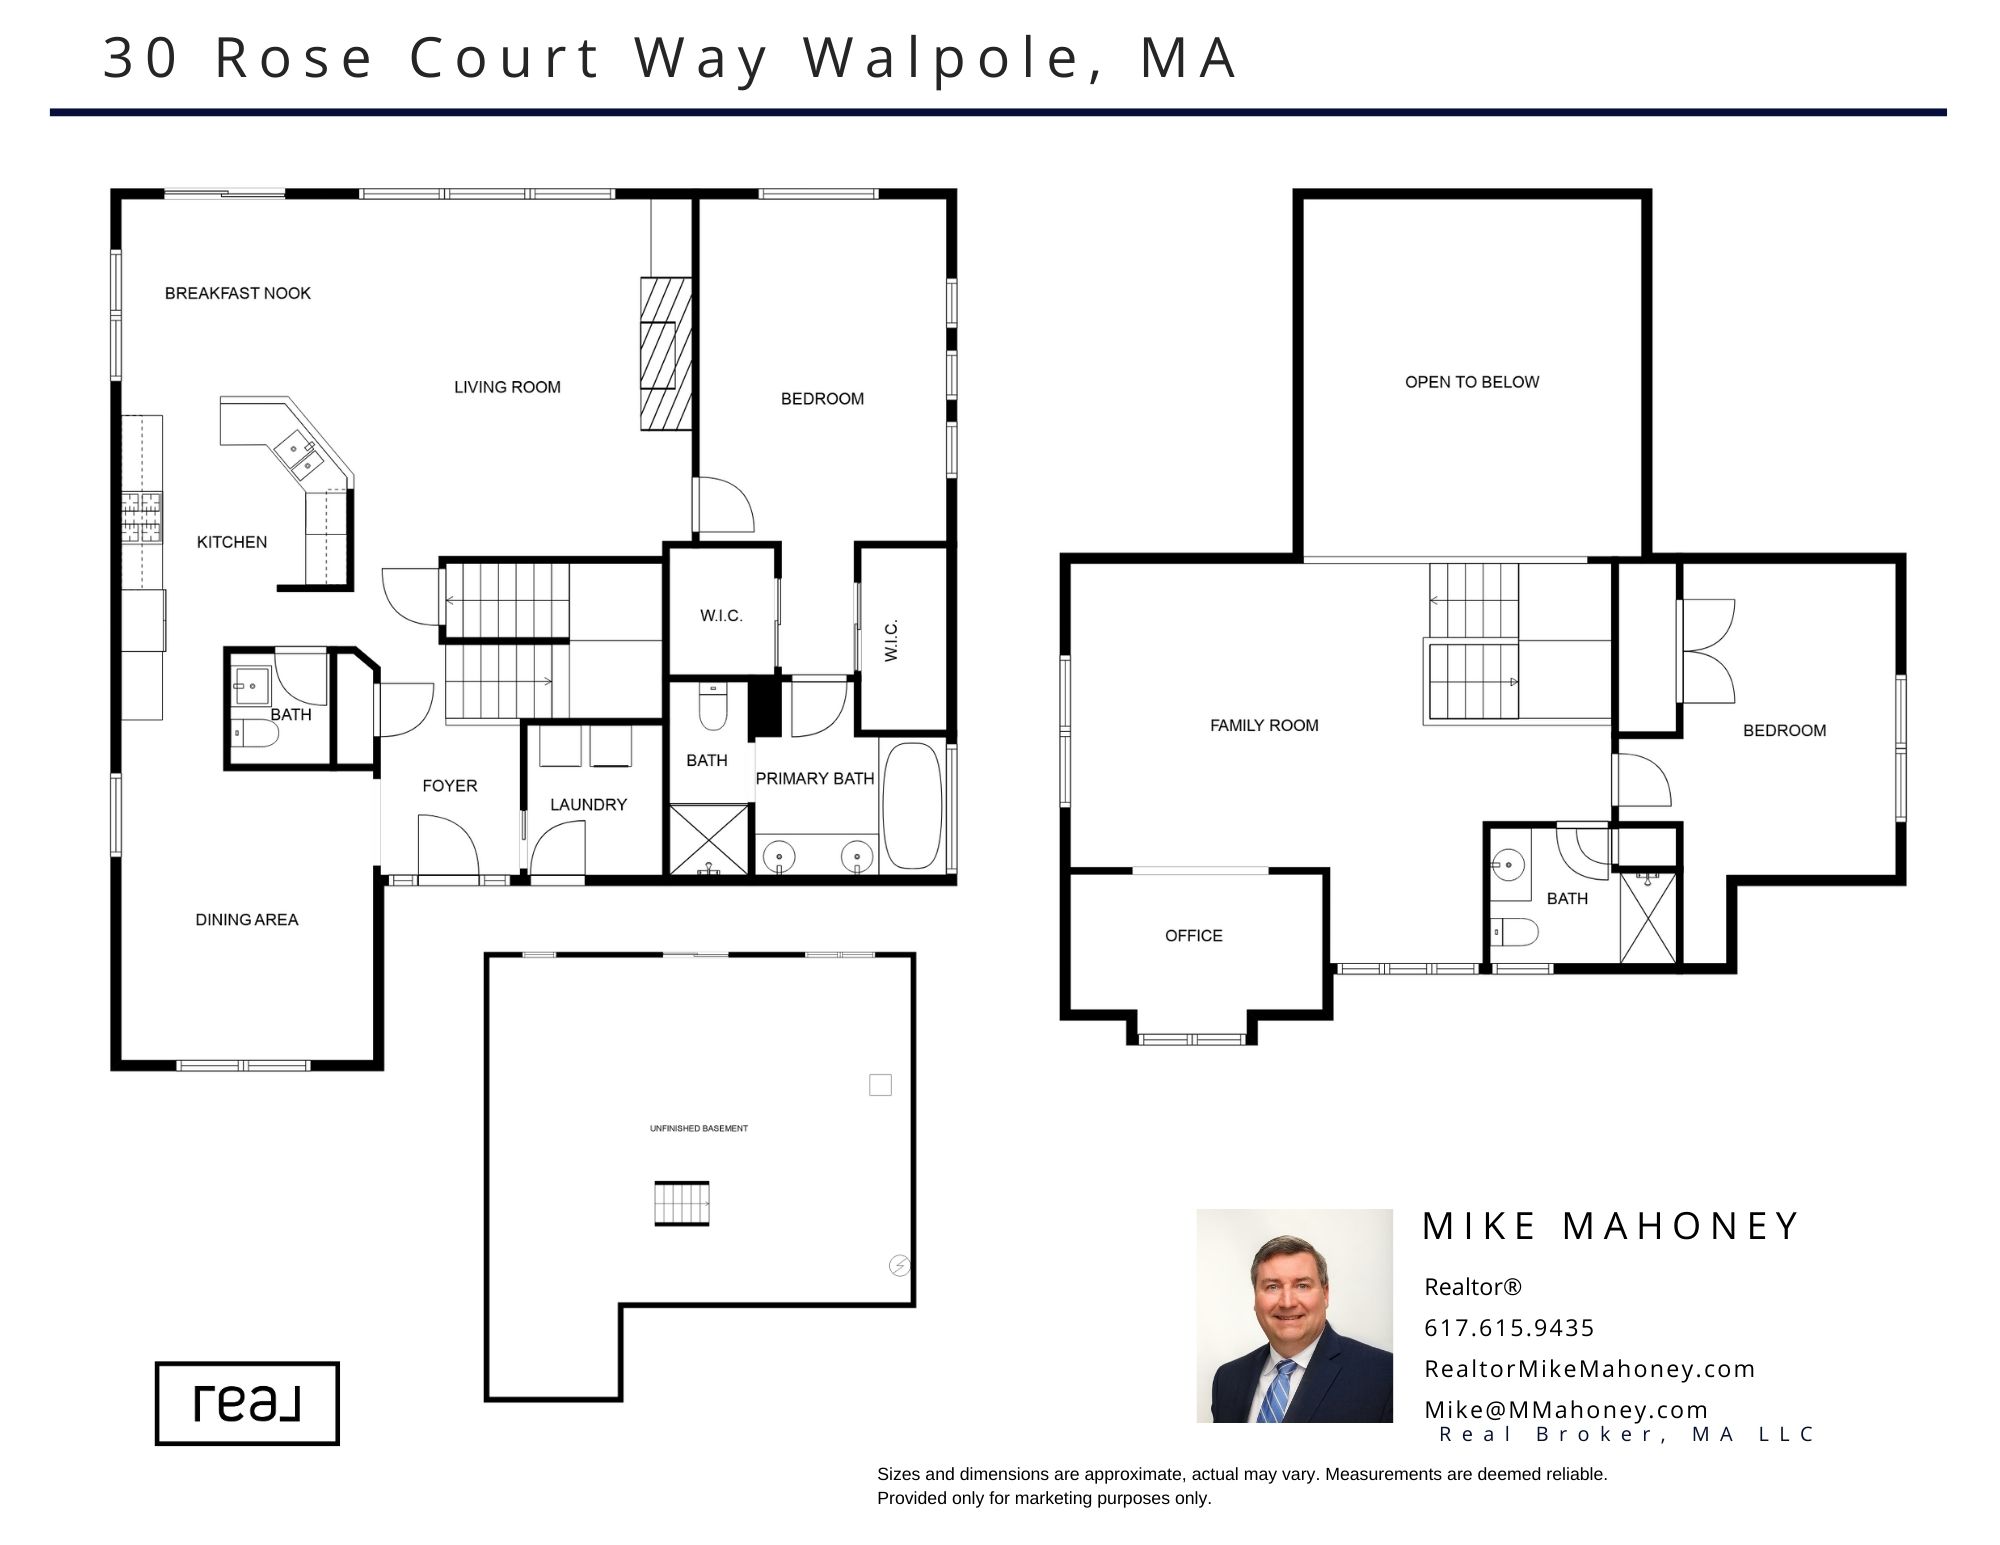 Floor plan for 30 Rose Court Way in East Walpole MA 02032 at the Riverwalk Commons complex.